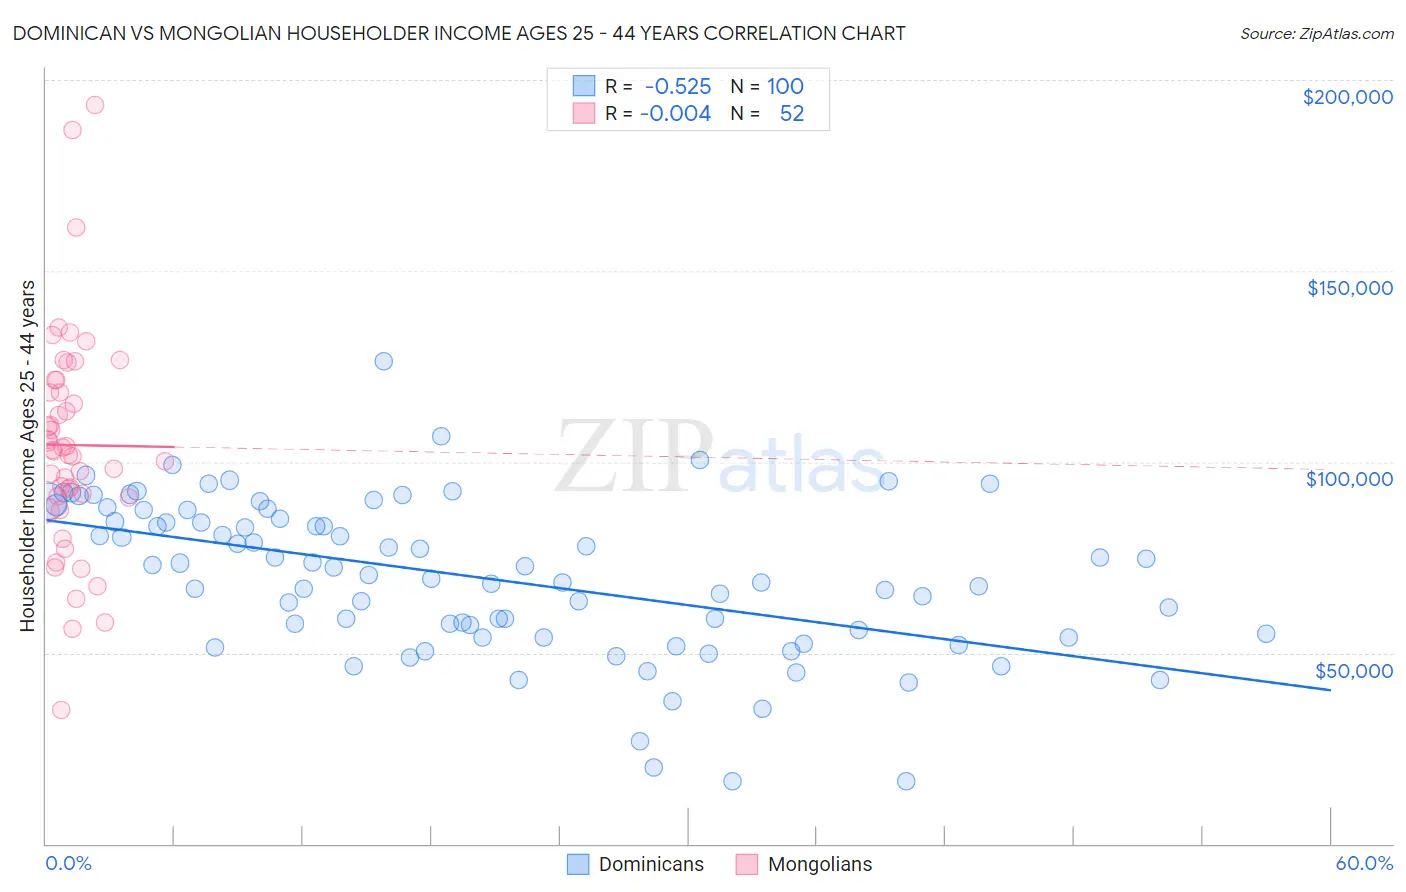 Dominican vs Mongolian Householder Income Ages 25 - 44 years